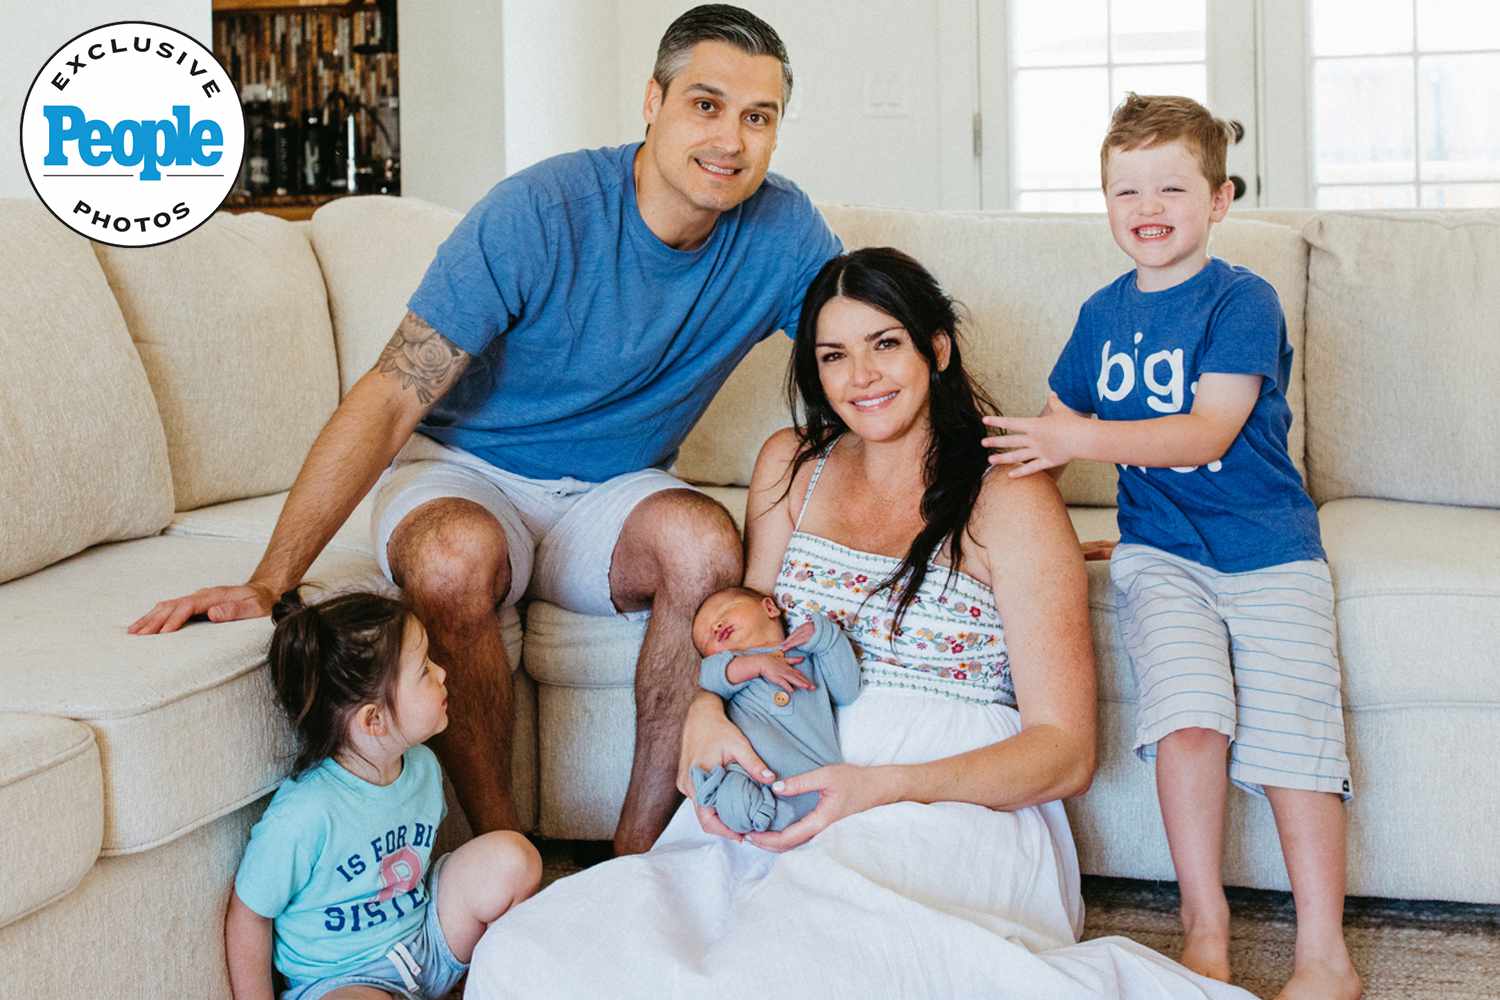 “Bachelor” Alum Courtney Robertson Welcomes Baby No. 3: 'As Sweet as They Come' (Exclusive)